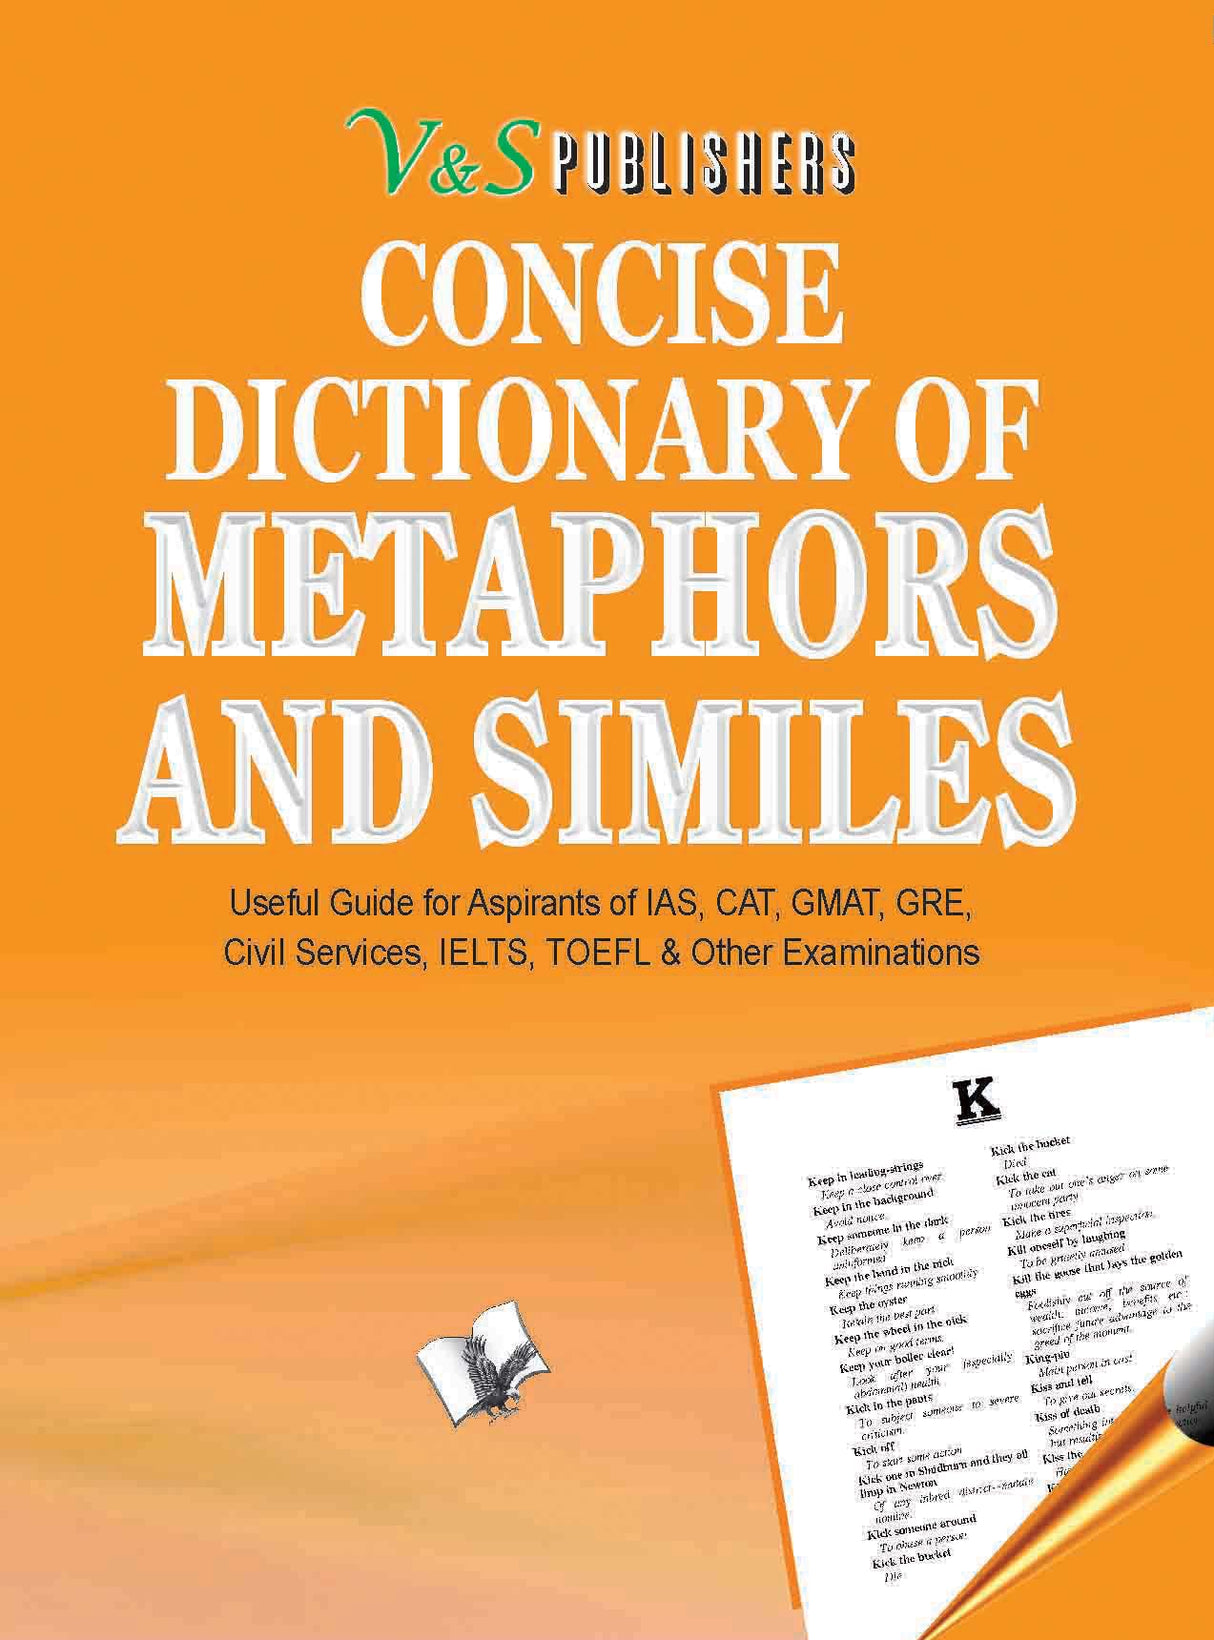 Concise Dictionary Of Metaphors And Similies (Pocket Size): Using Metaphors & Similes to write attractive English